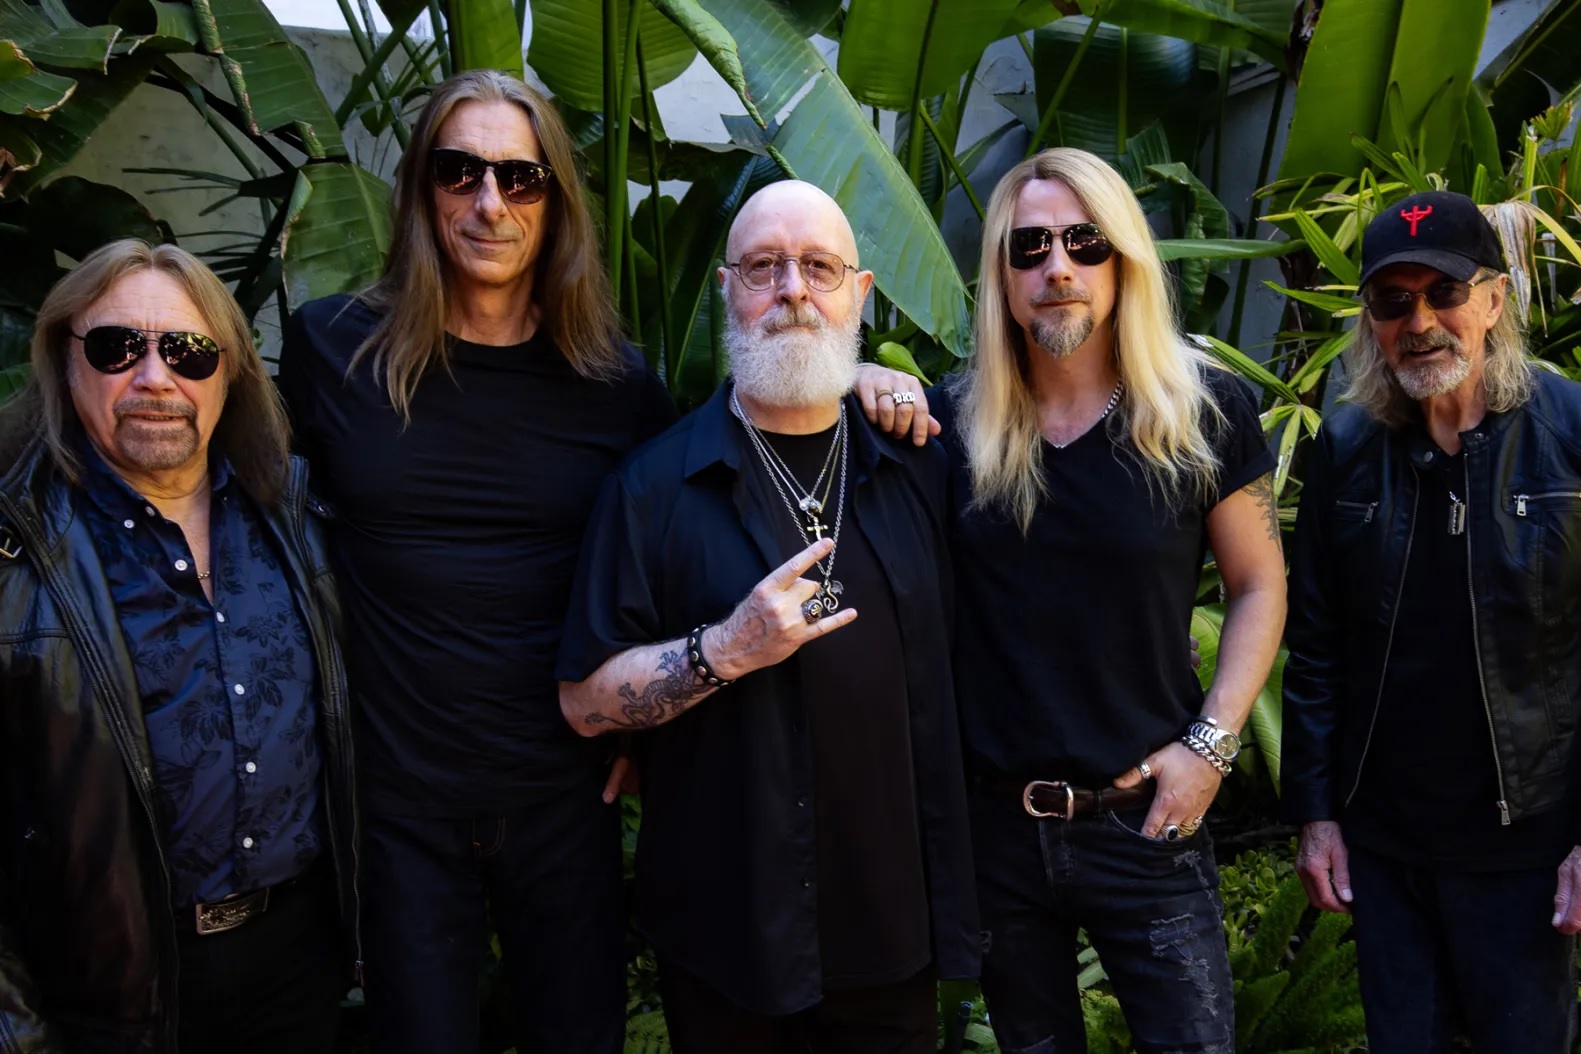 Check out the new track from Judas Priest